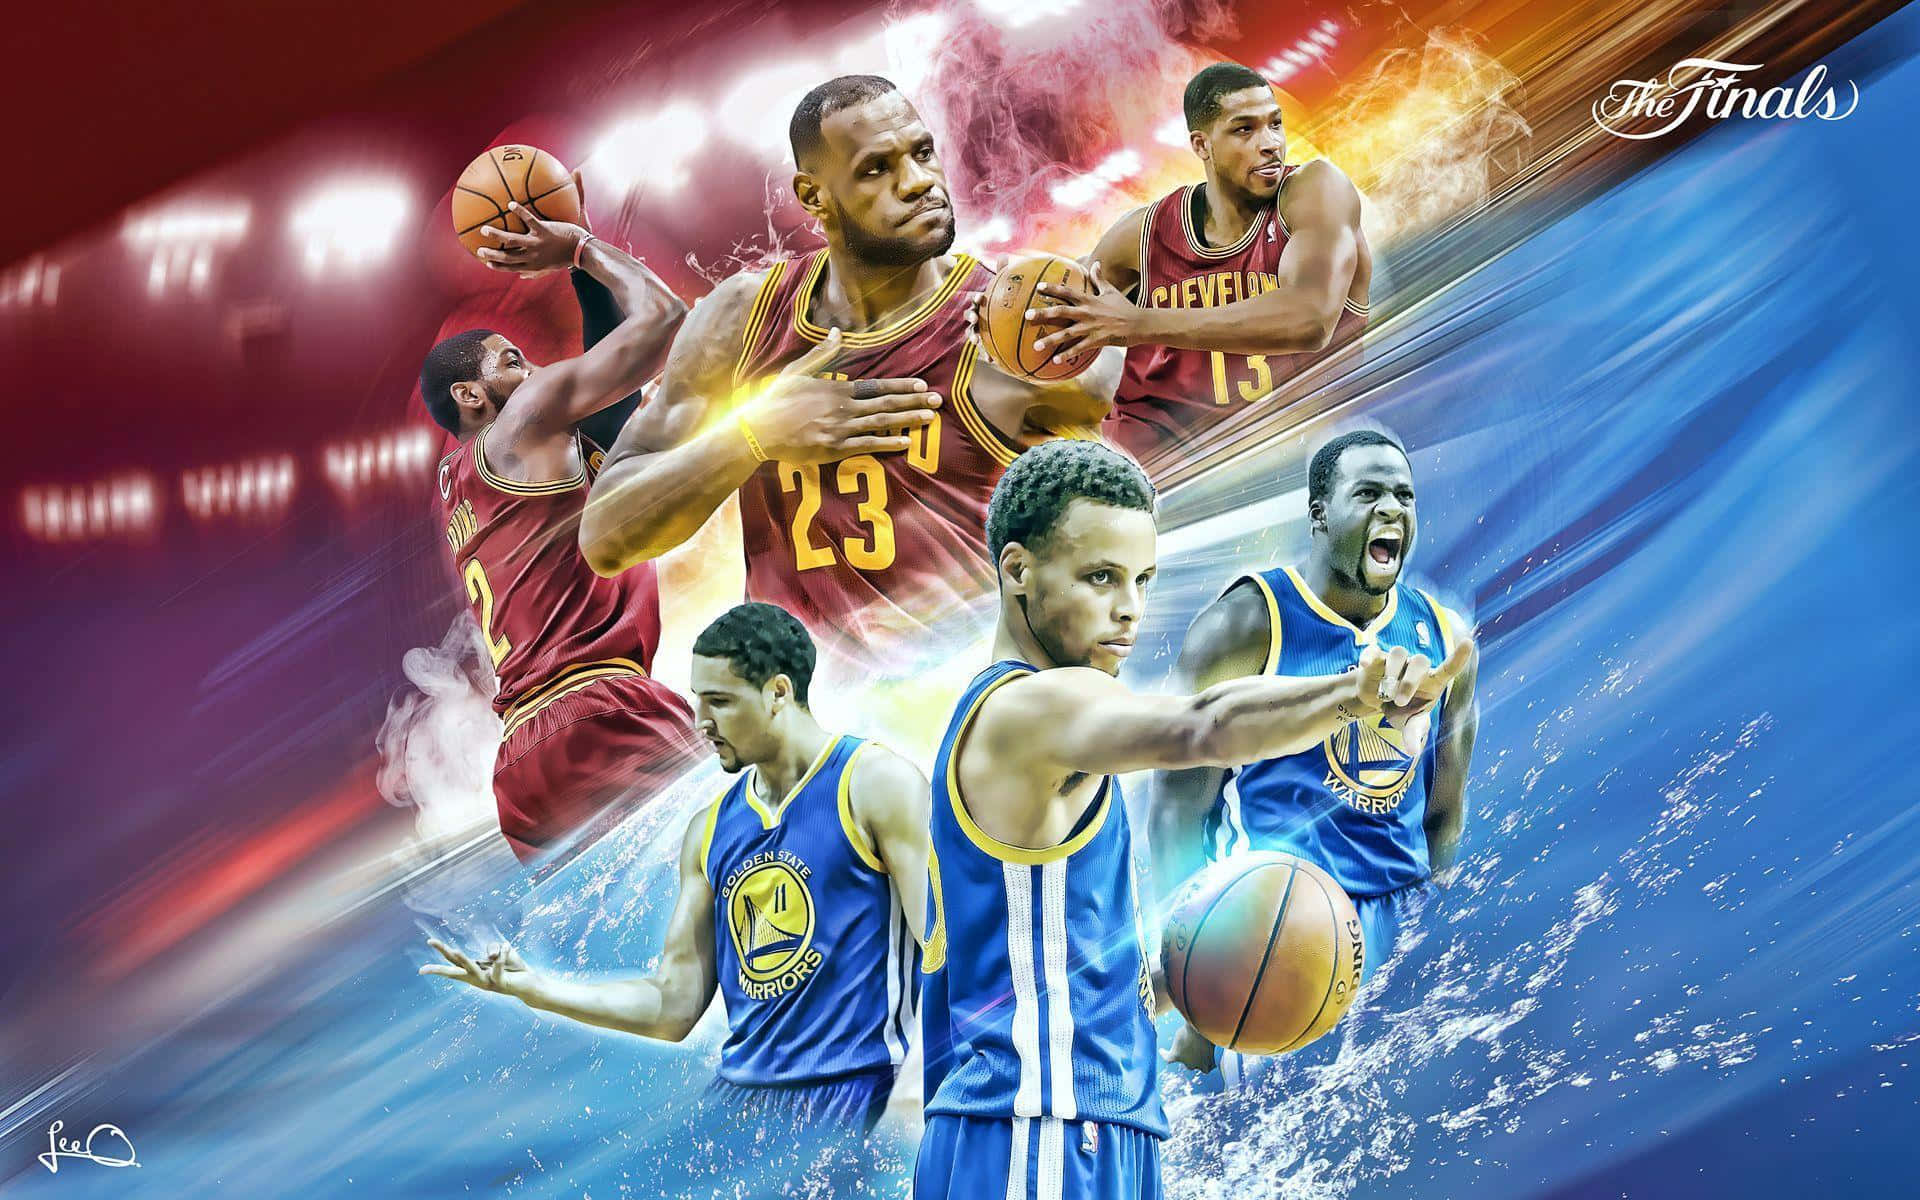 Experience The Best Of Nba With The New Wallpaper. Background